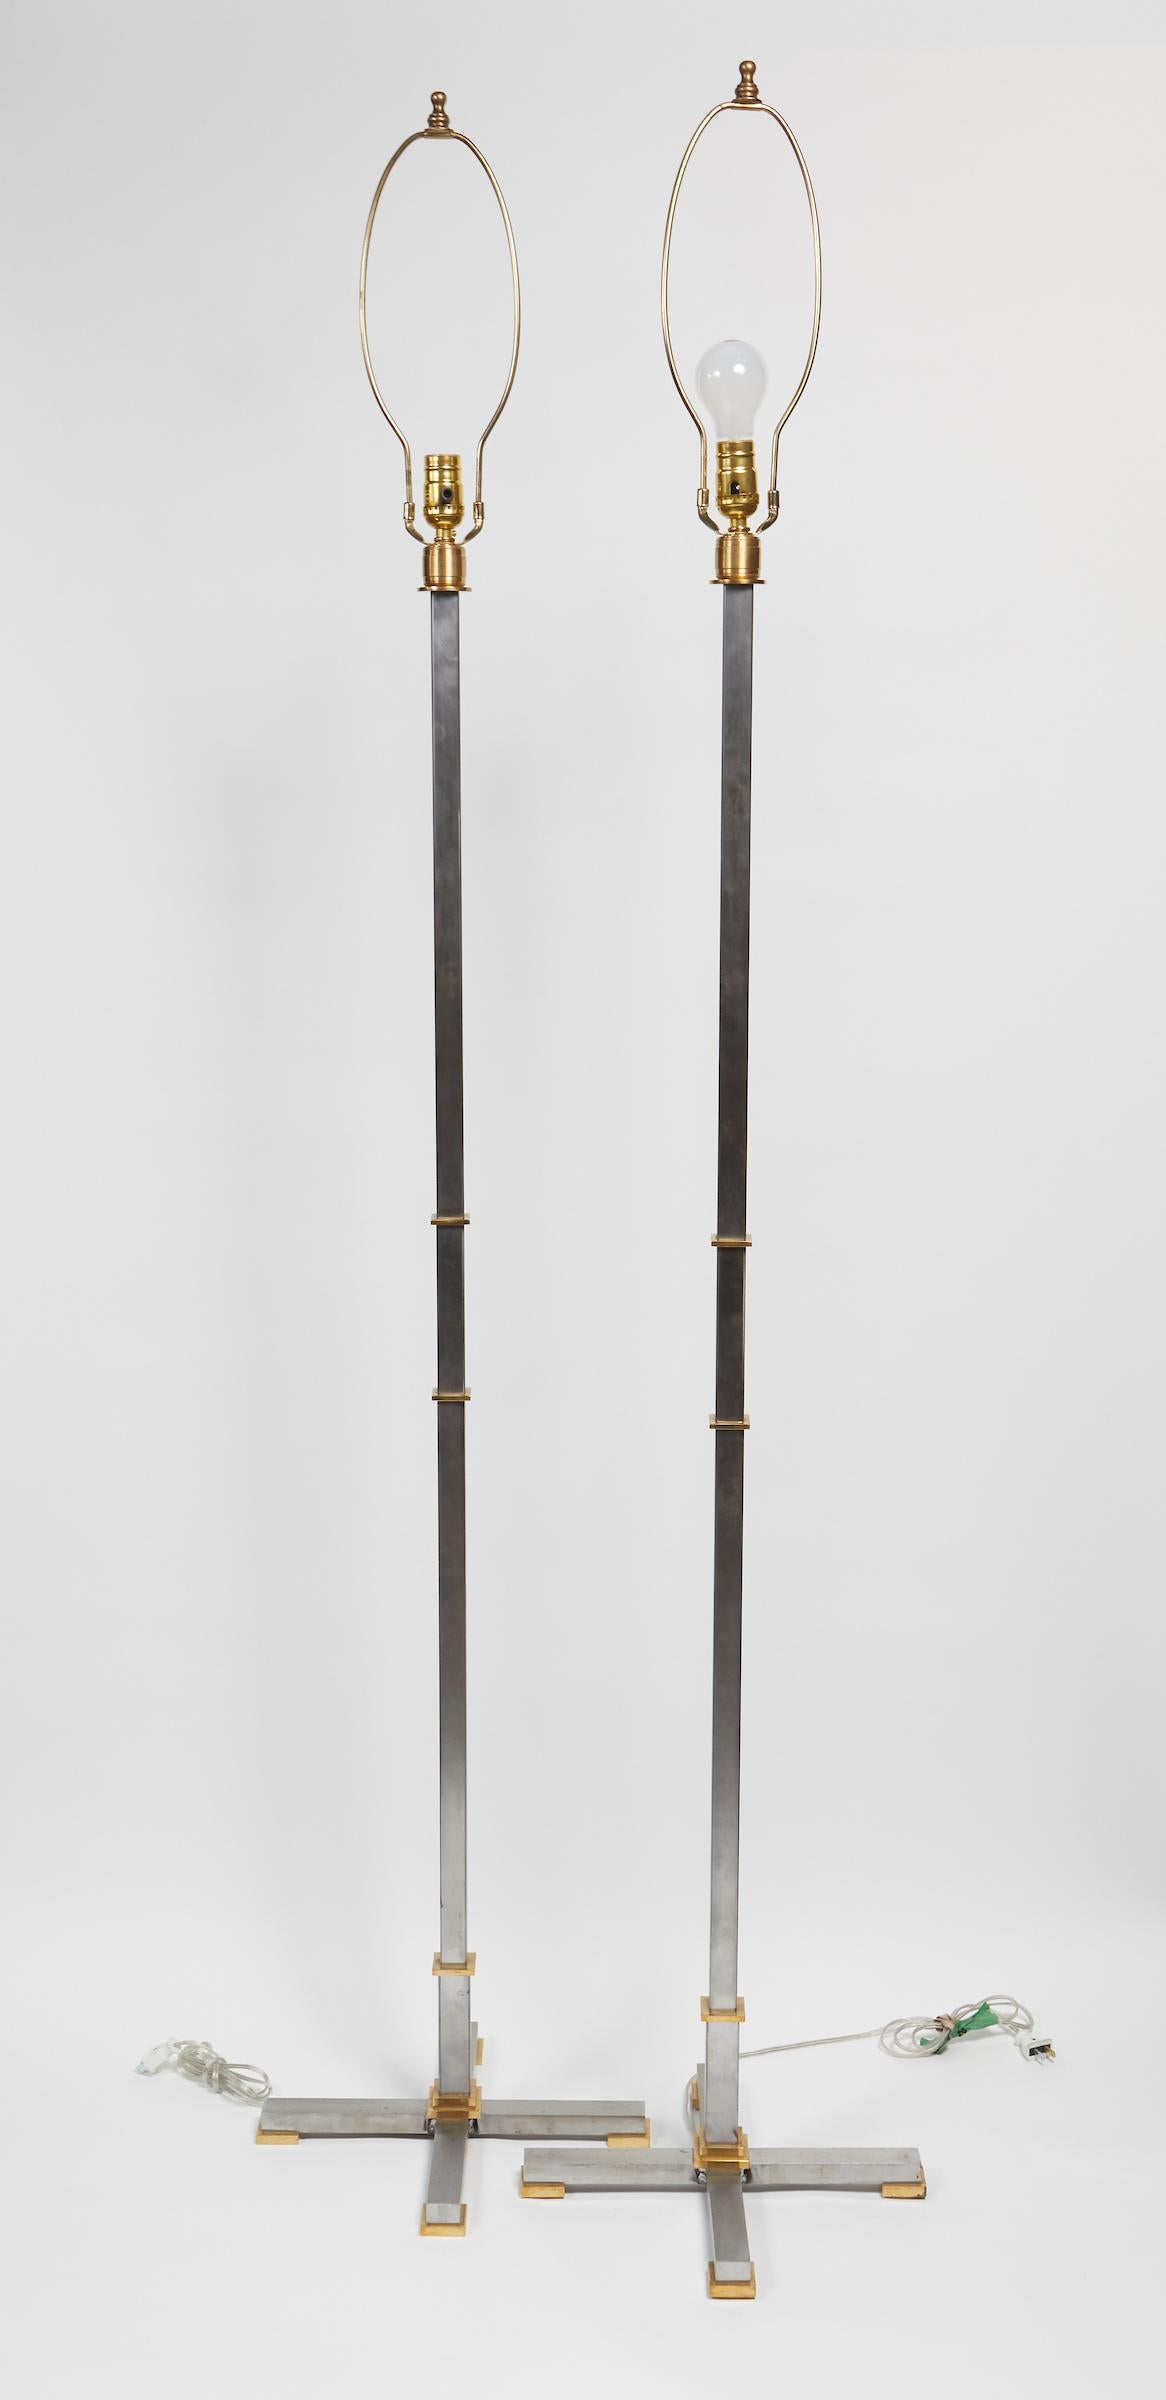 Elegant Pair of Brushed Steal and Solid Brass Floor Lamps by Maison Jansen 1